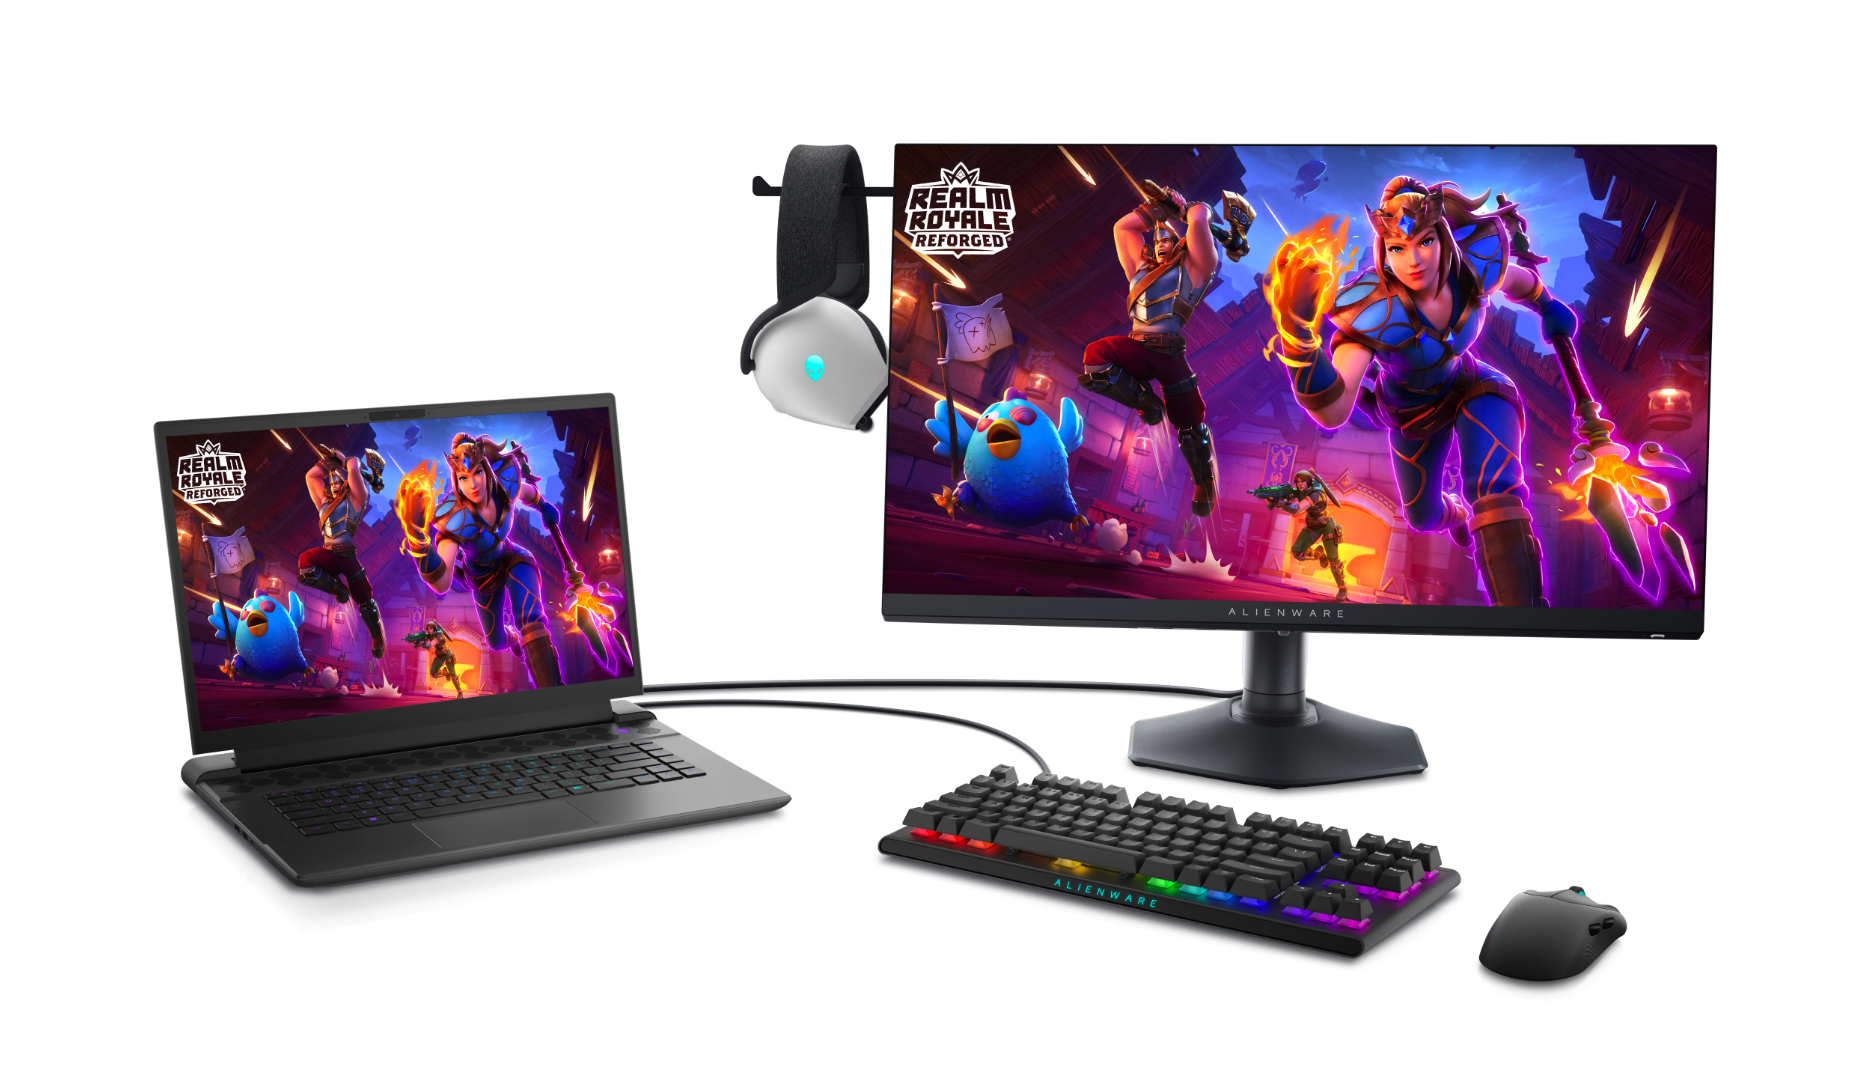 Dell Alienware AW2724HF with a 360Hz FHD display is now official